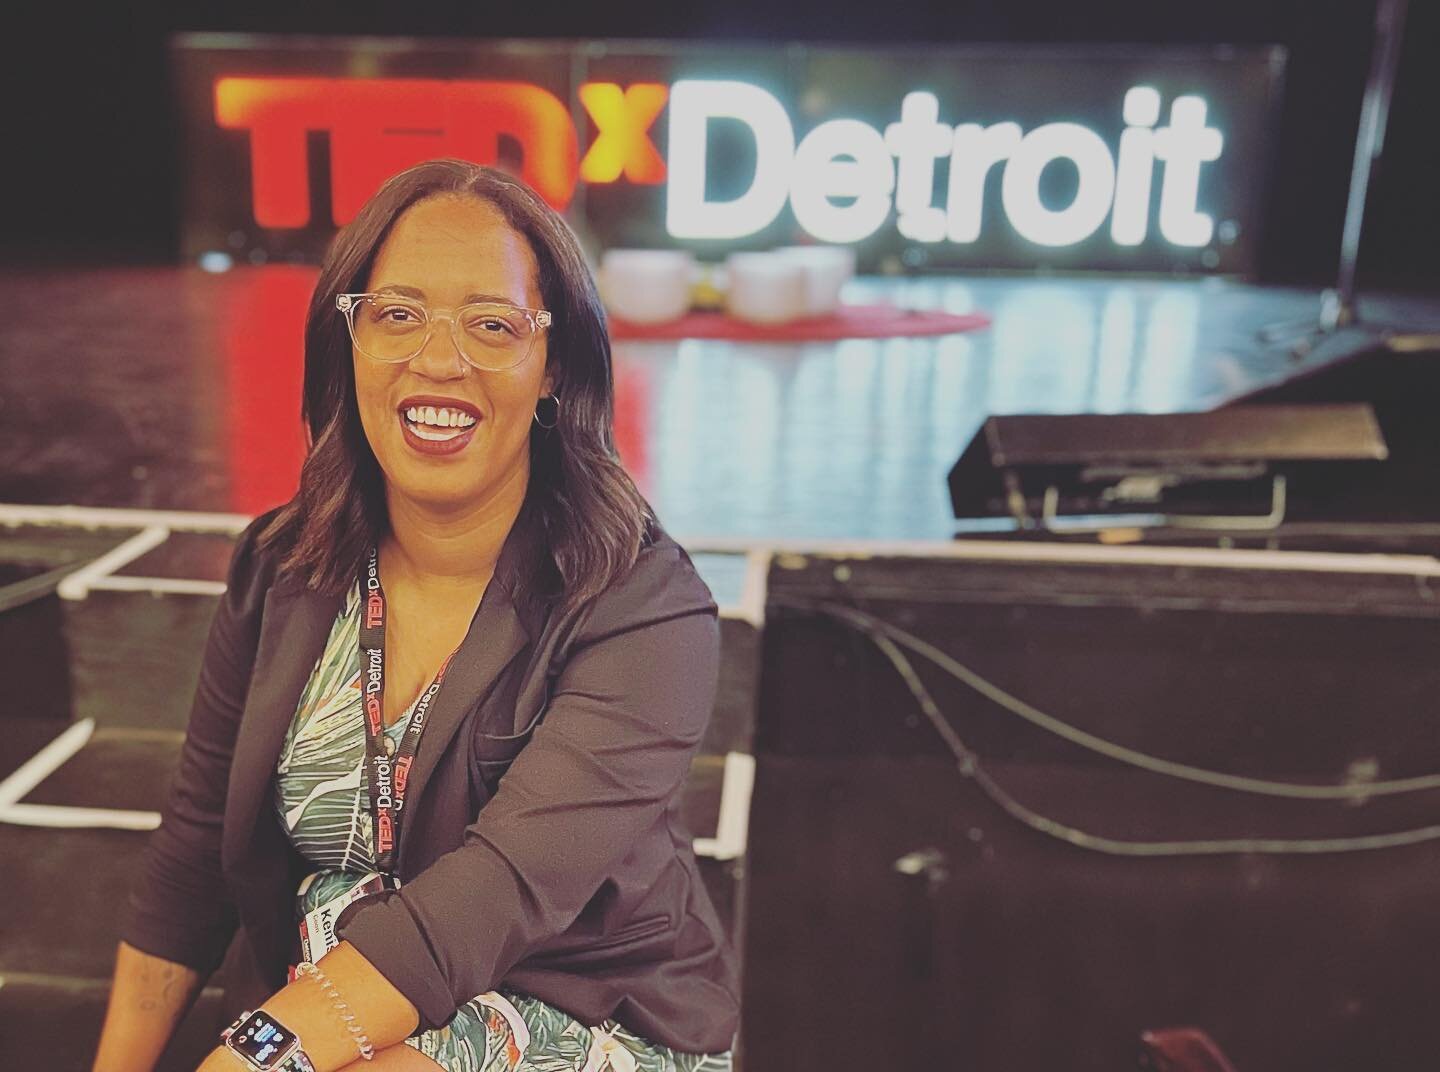 ✨Manifesting being a  #tedxspeaker one day ! ✨

#tedxdetroit was 🔥🔥- so many things I learned about, so many inspirational folx speaking, and so much motivational work in the DEI realm 🥰🥰

#motivationalspeaker #deileaders #tedtalk #tedx2022 #tran